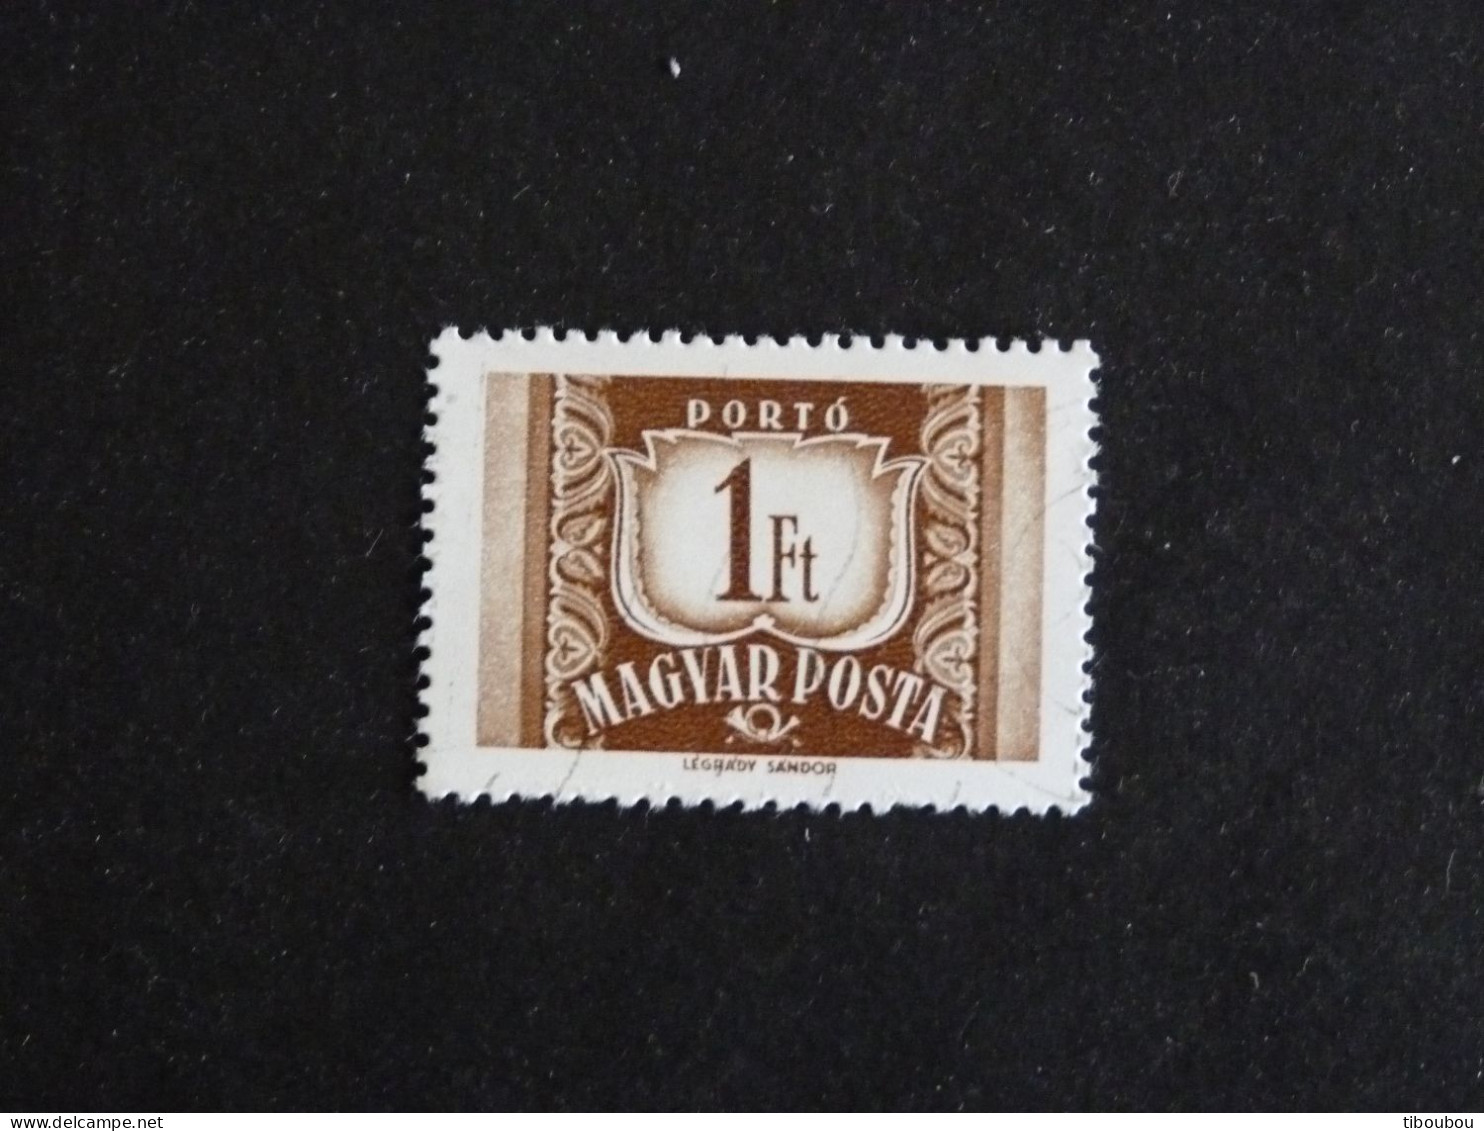 HONGRIE HUNGARY MAGYAR YT TAXE 231A OBLITERE - Postage Due